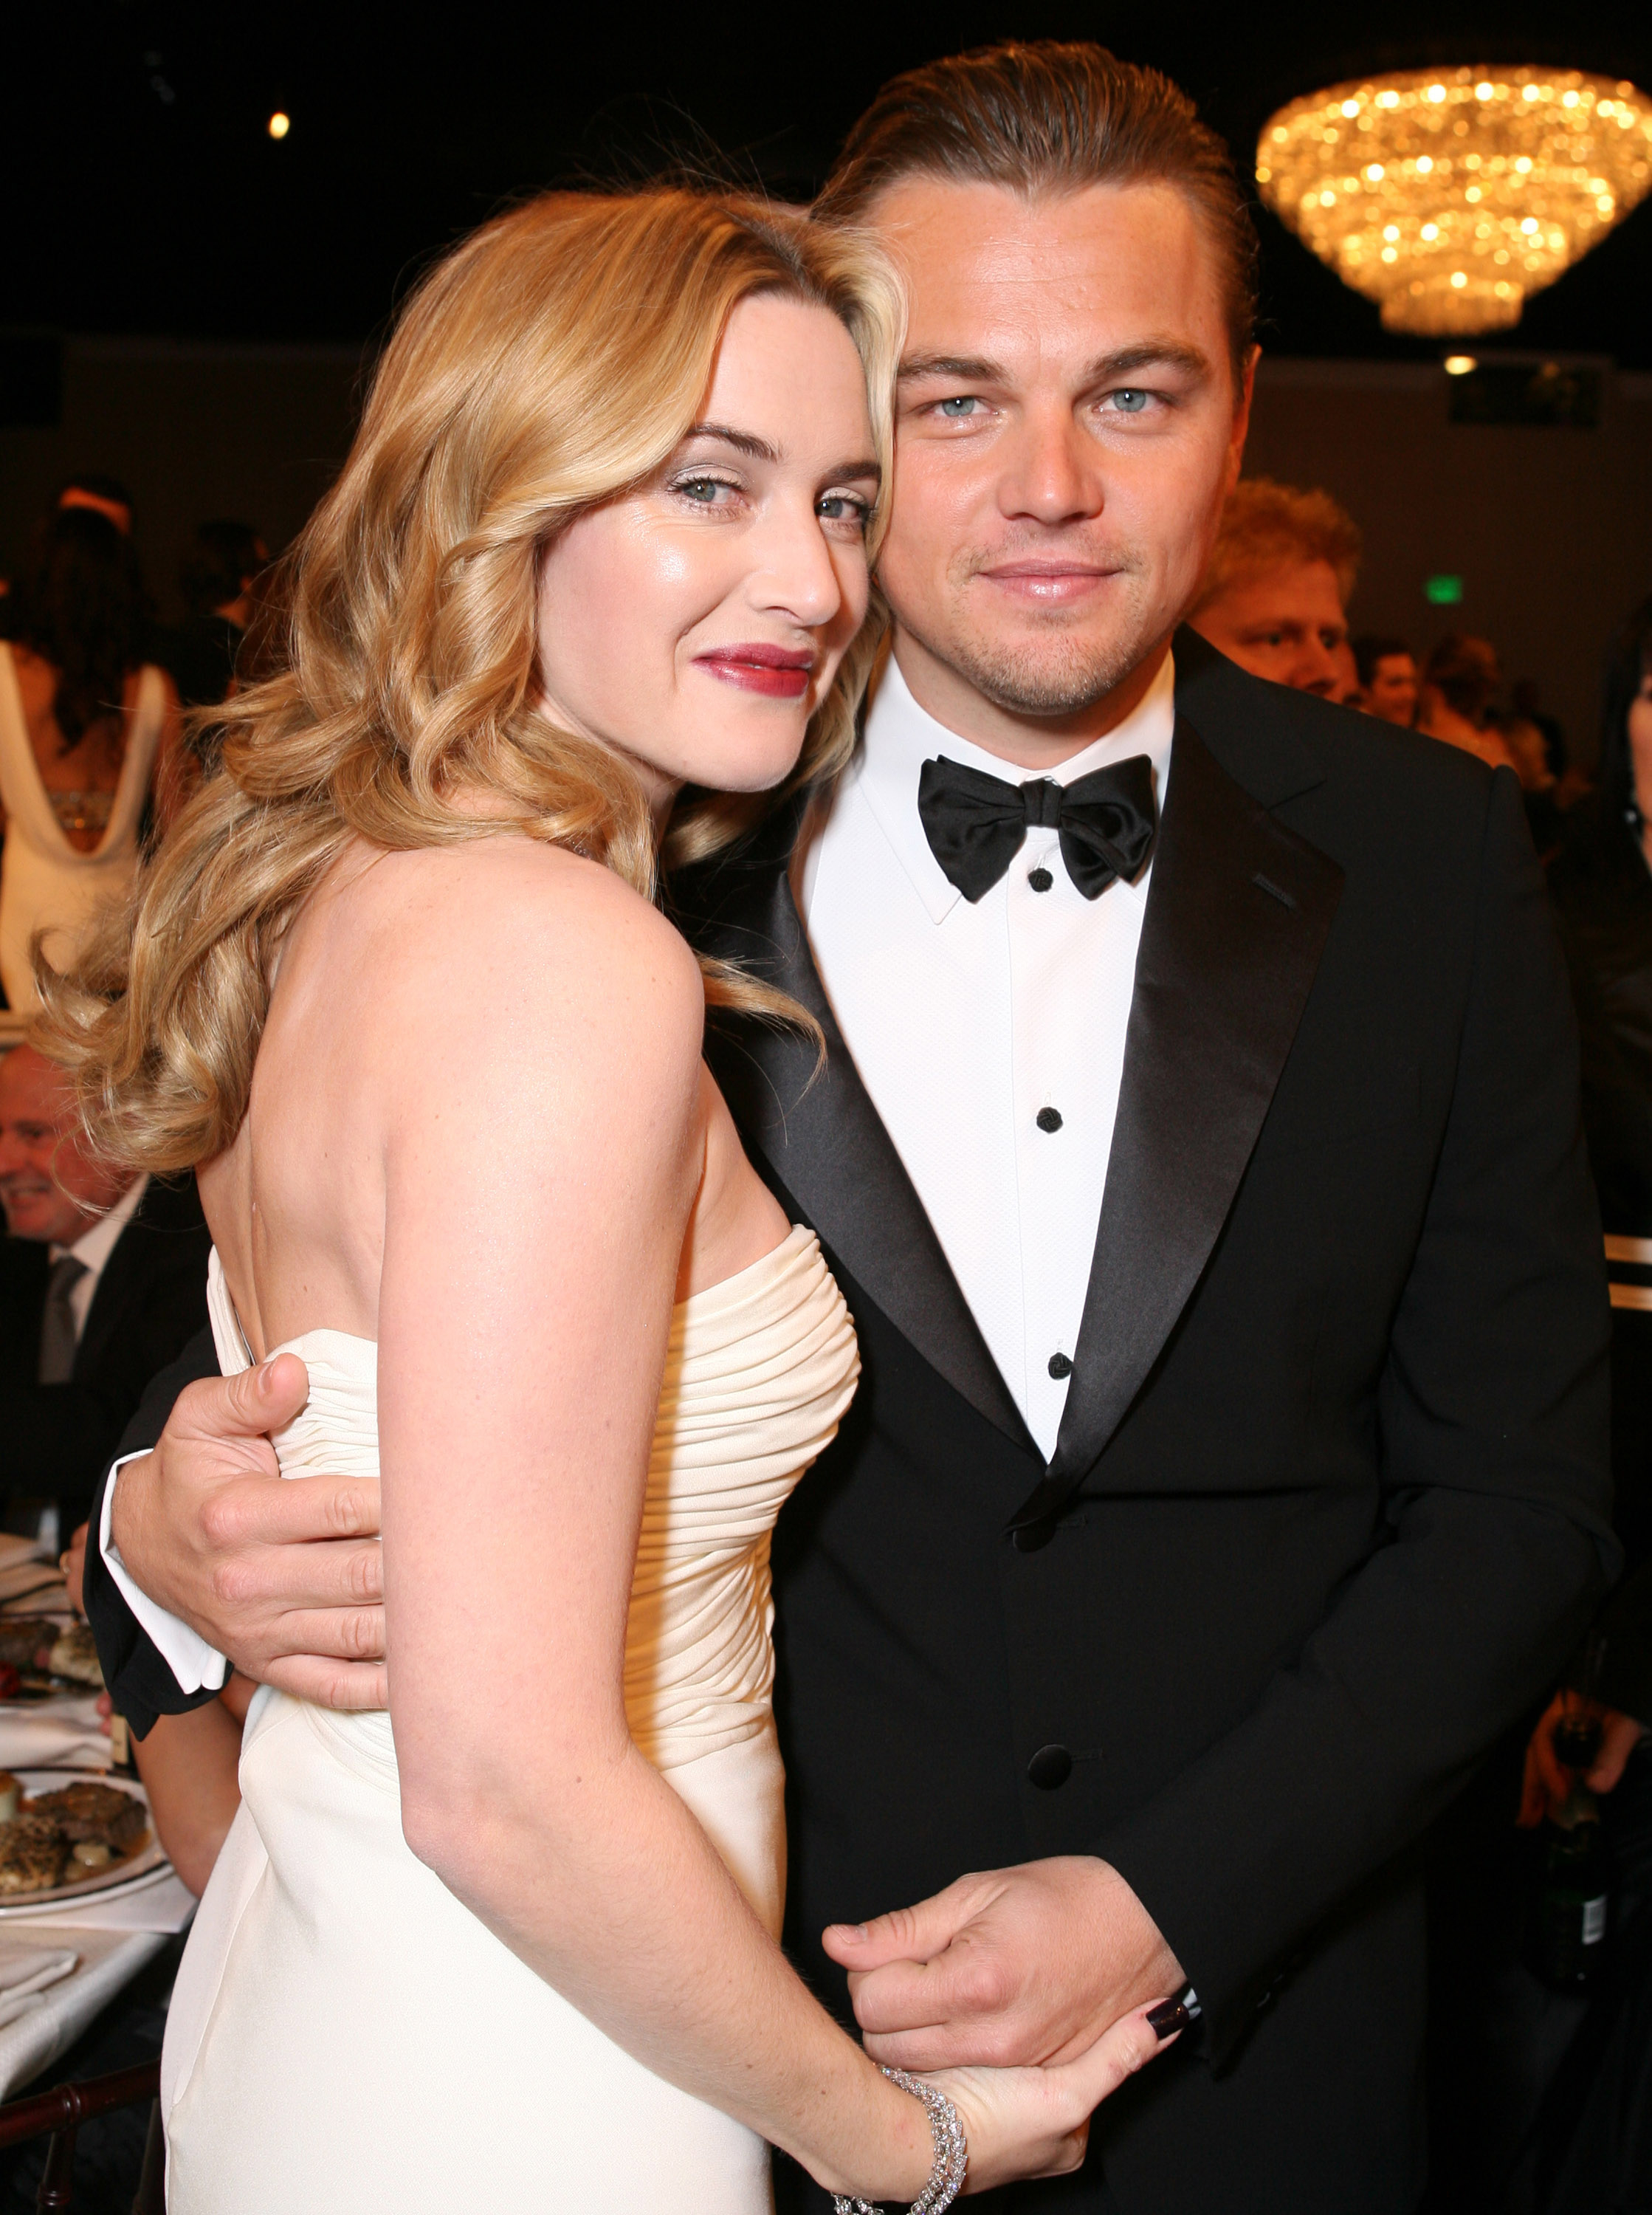 Leo and Kate smiling and embracing